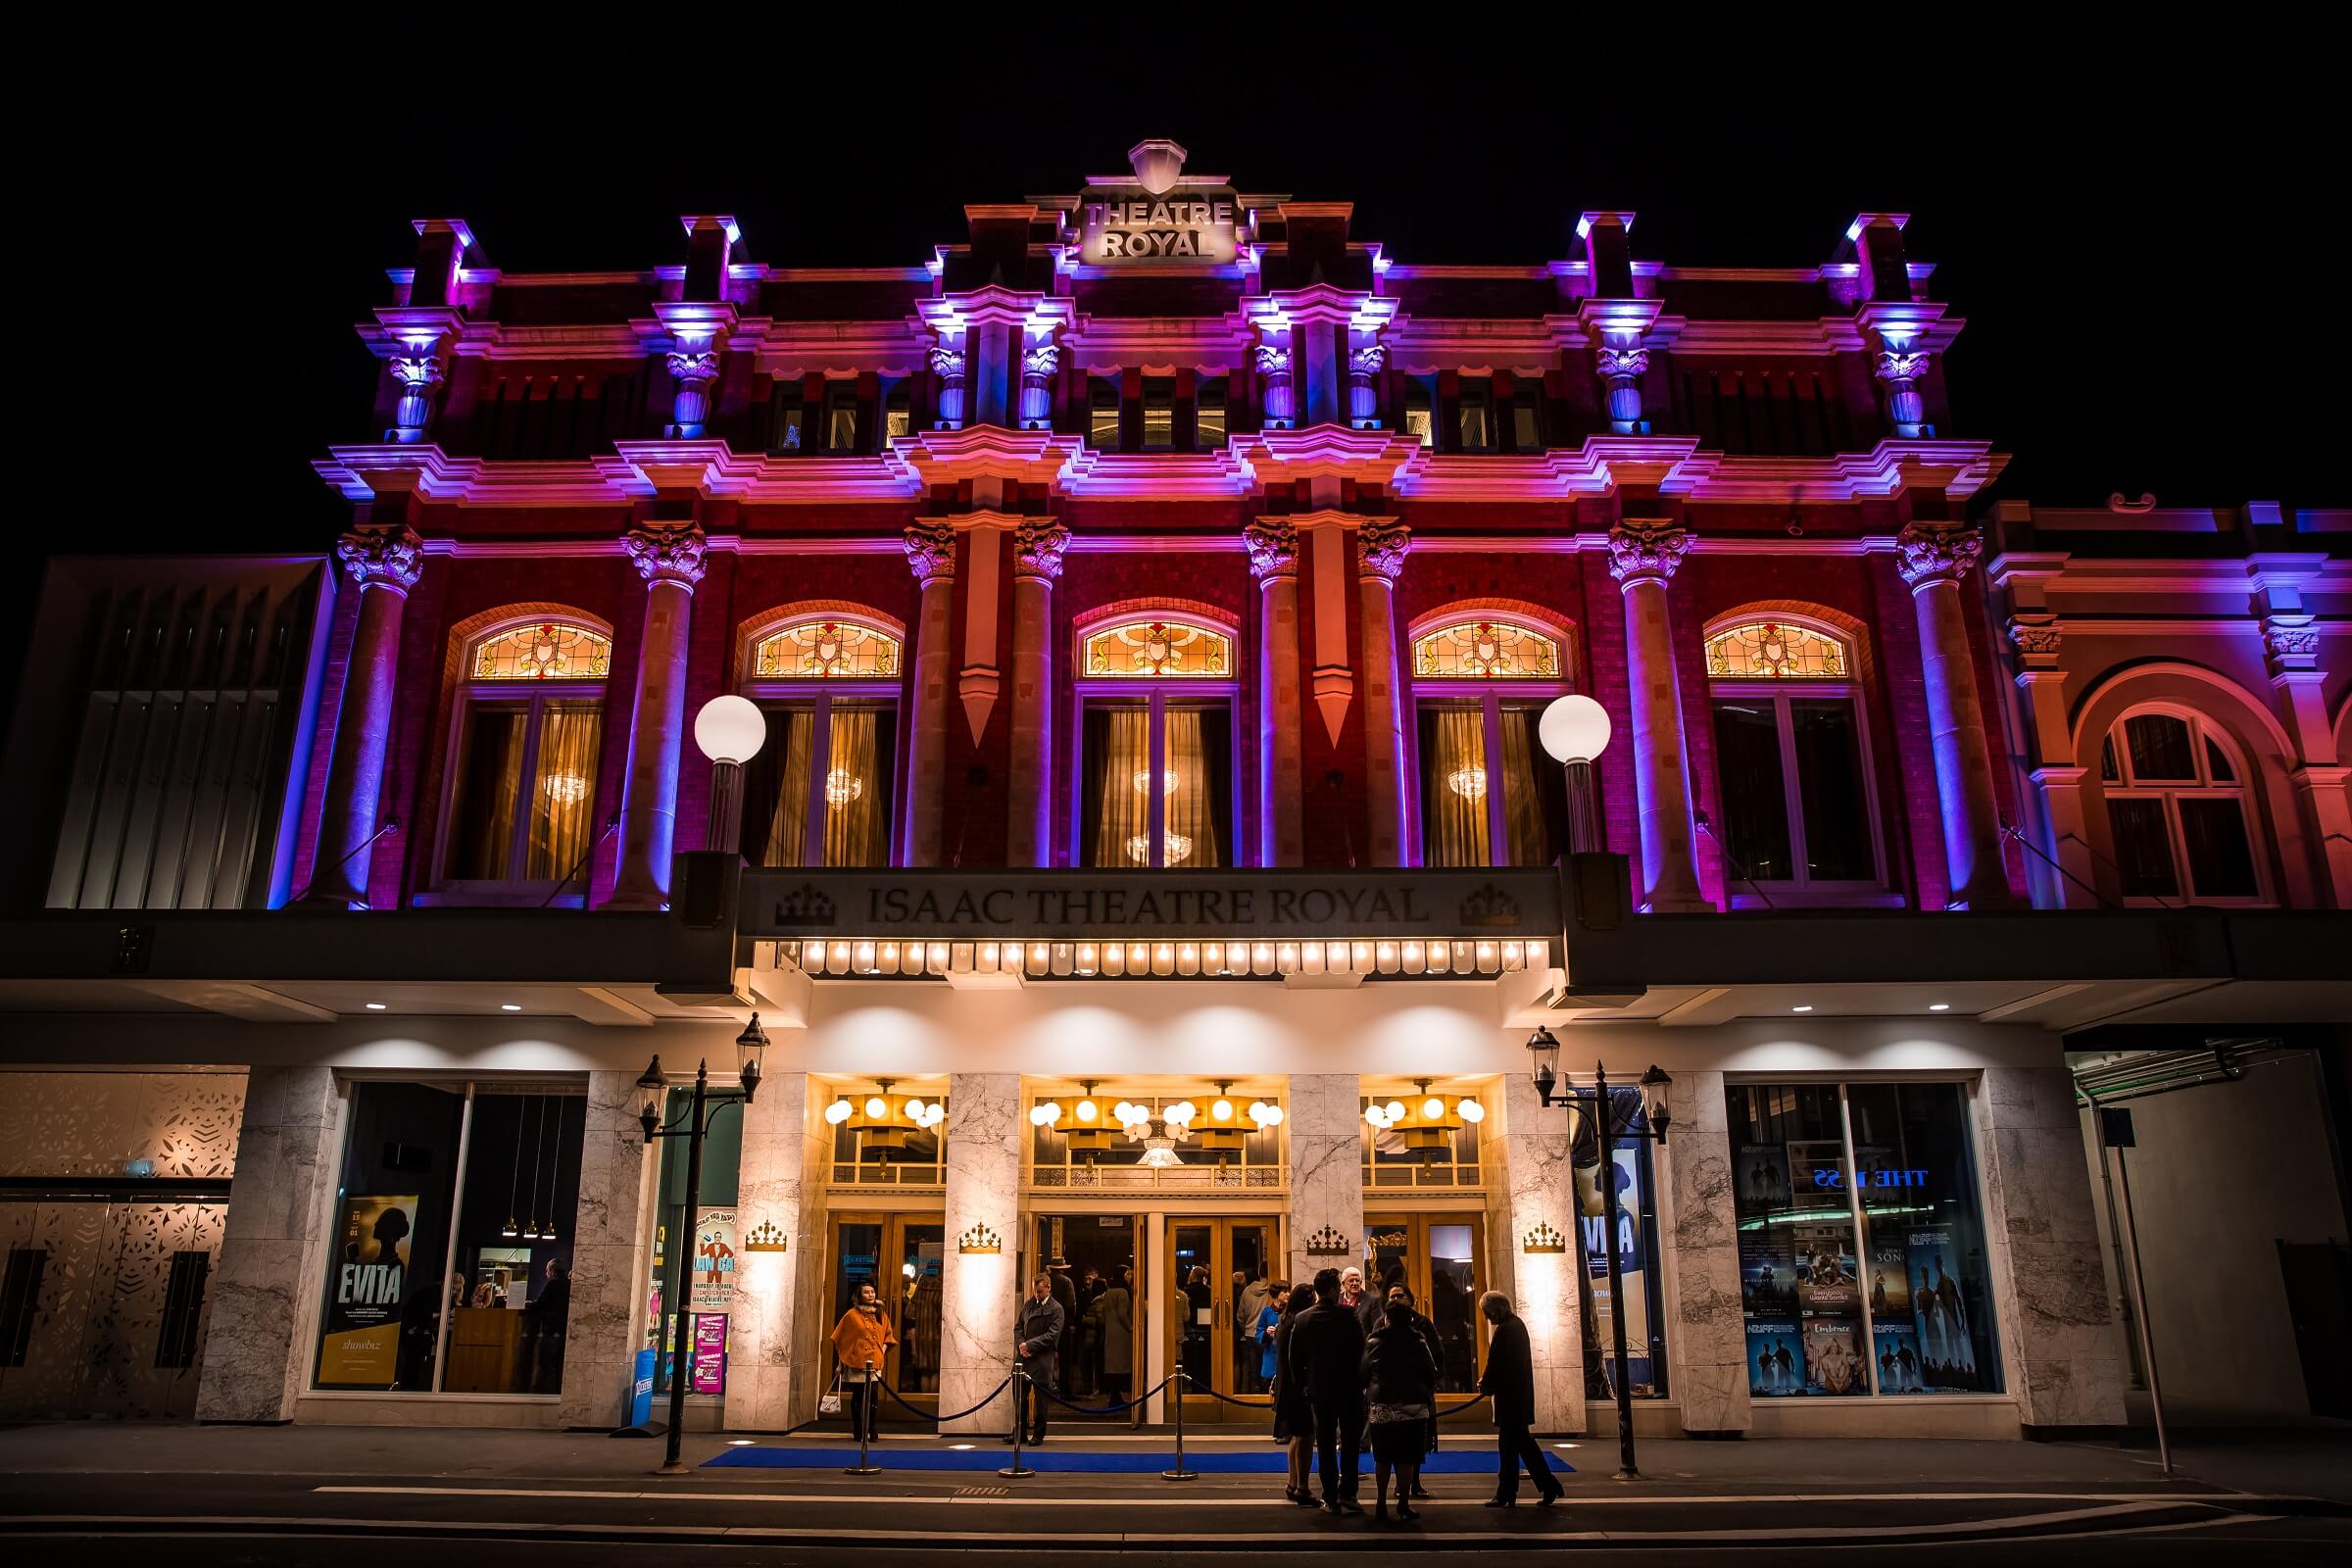 Isaac Theatre Royal night lights illuminating the building in purple and red 